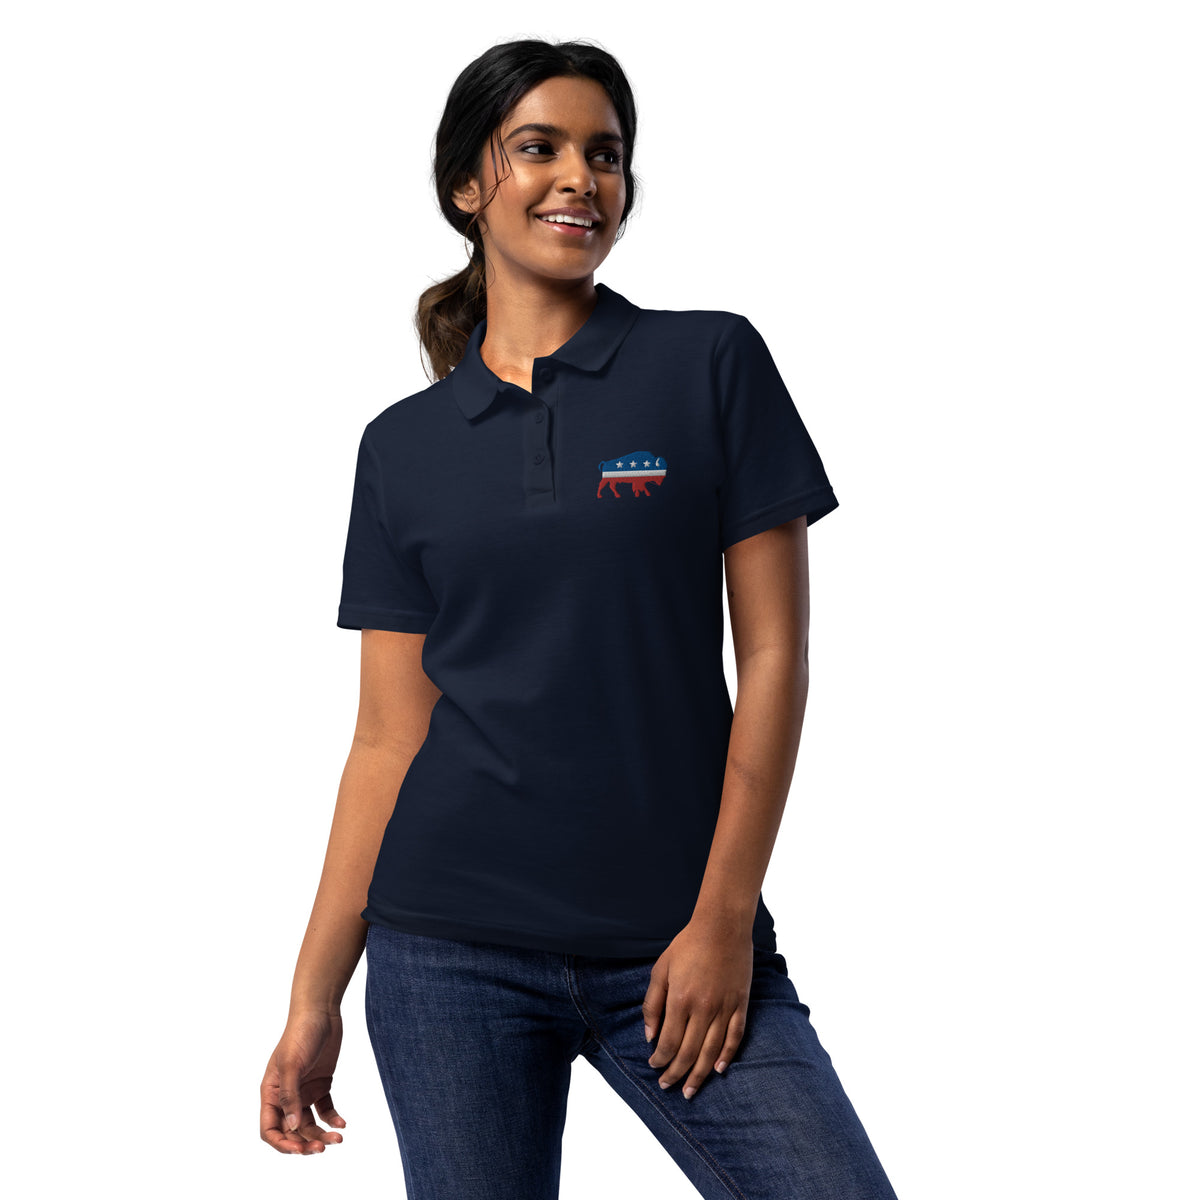 Independent Bison Women’s Pique Polo Shirt